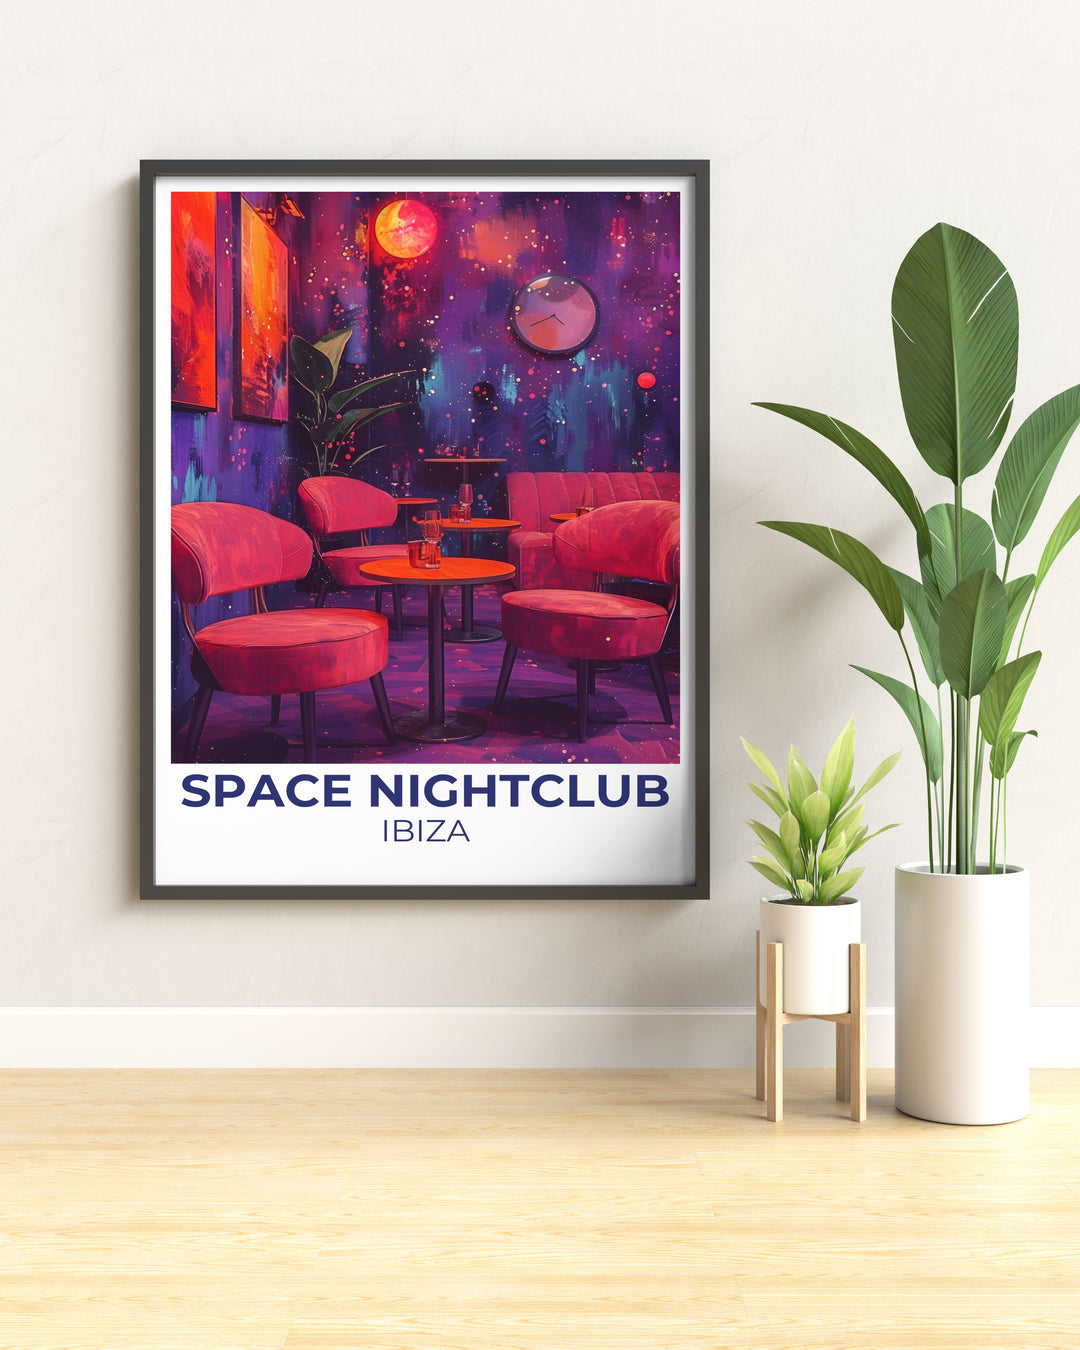 Custom Print of Space Nightclubs dance floor with vibrant lights and energetic crowds, bringing the excitement and energy of Ibizas famous nightlife into your home decor. Ideal for music lovers and party enthusiasts.